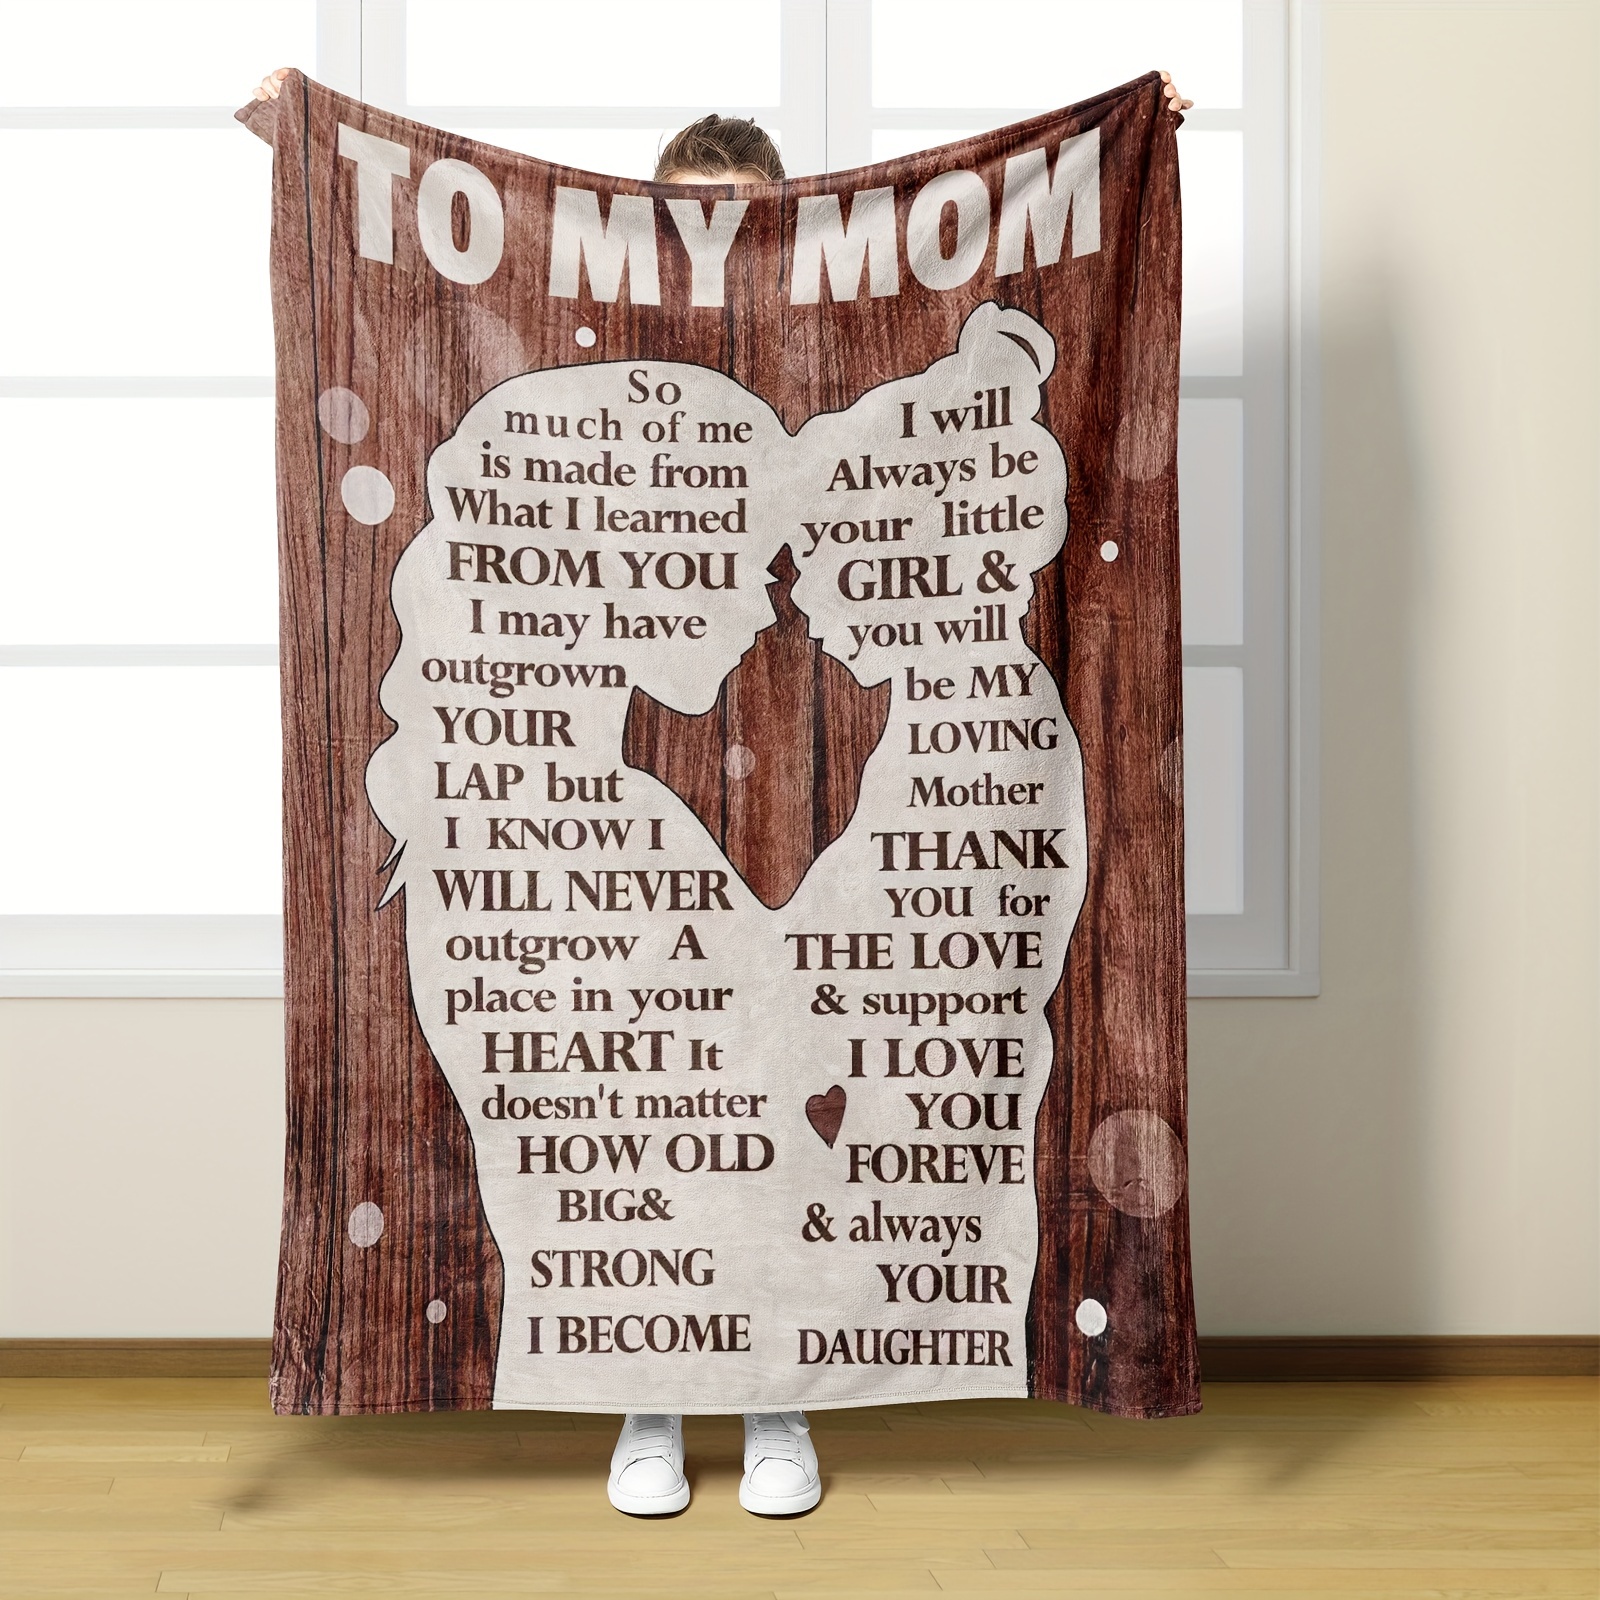 Mom Blanket Gift,Mother Blanket Gift to My Mom,Mother's Day Blanket  Gift,Mom Throw Blanket Gifts for Mother Birthday Christmas Thanksgiving